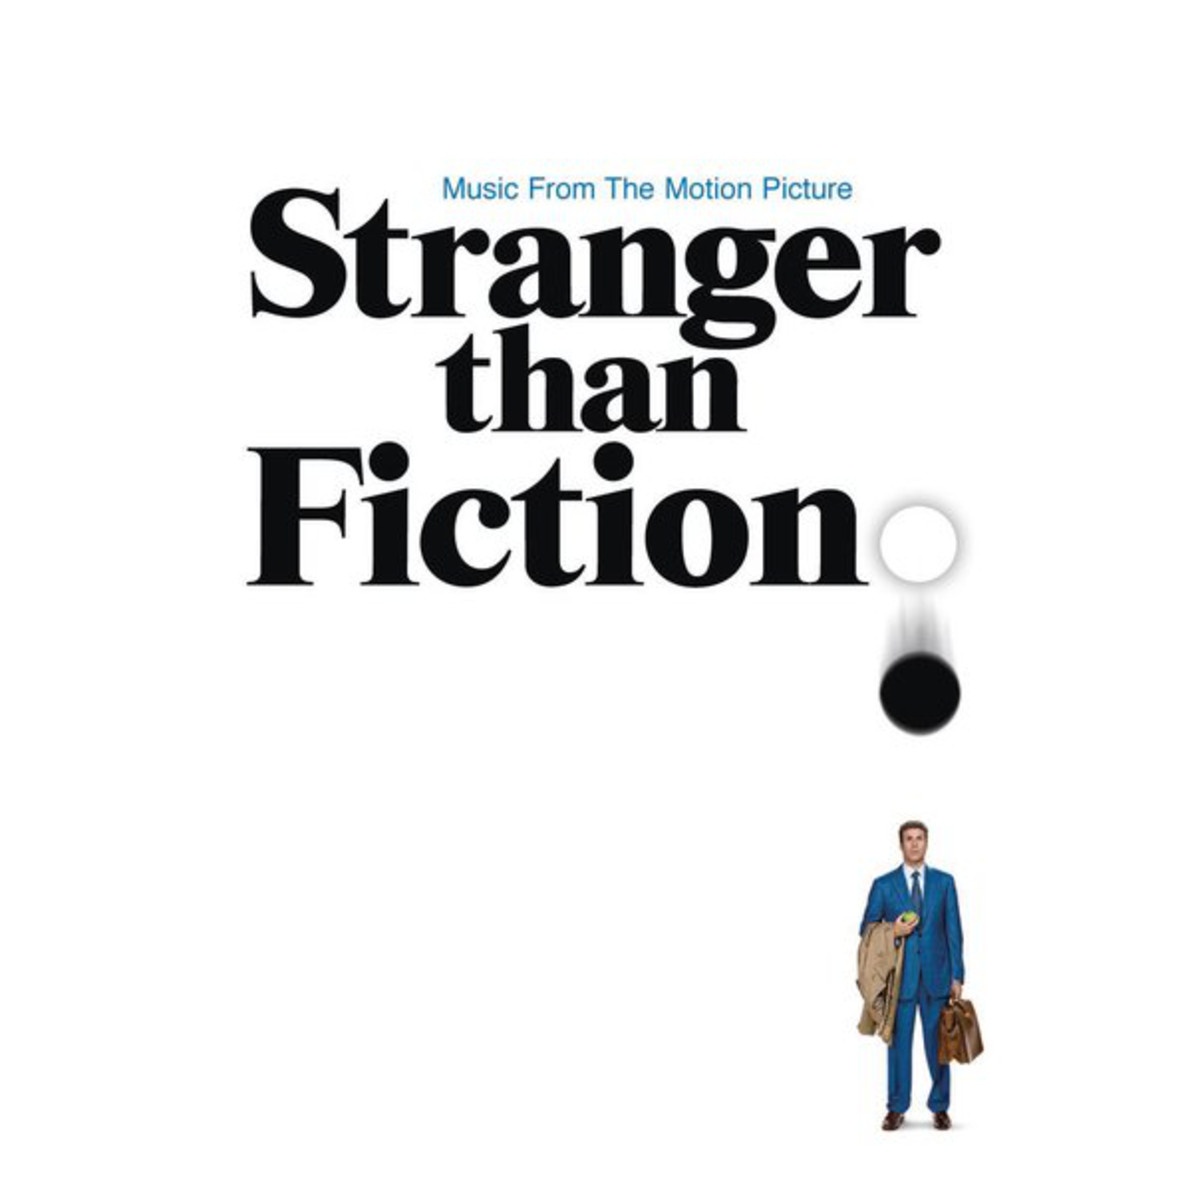 Stranger than Fiction (Music From The Motion Picture)